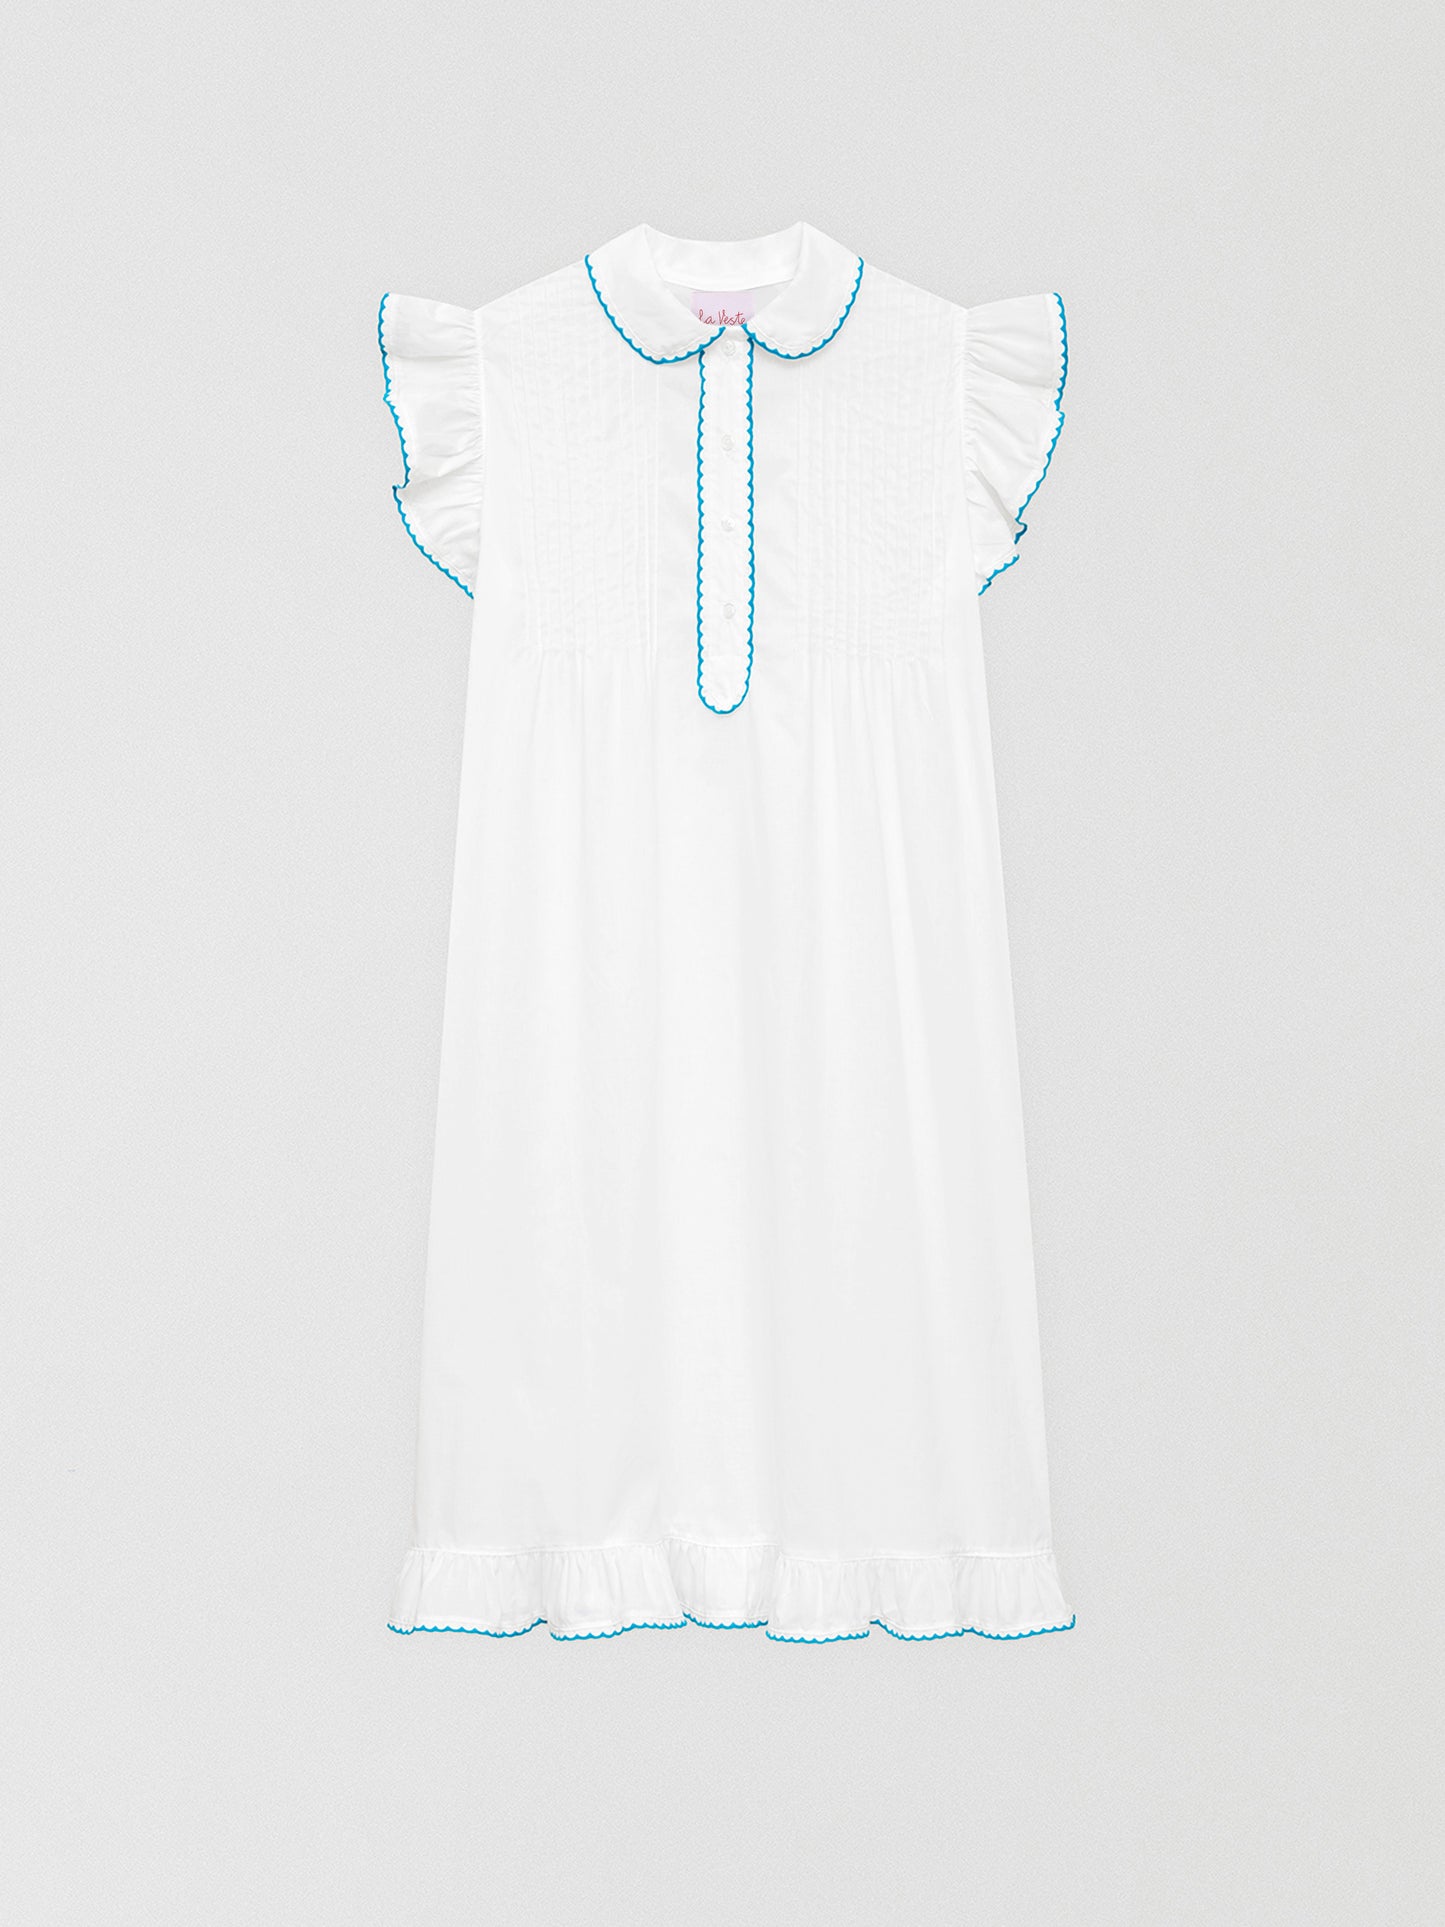 Wendy Nightgown White 01 is a white cotton midi style nightgown with matching blue bias binding details.